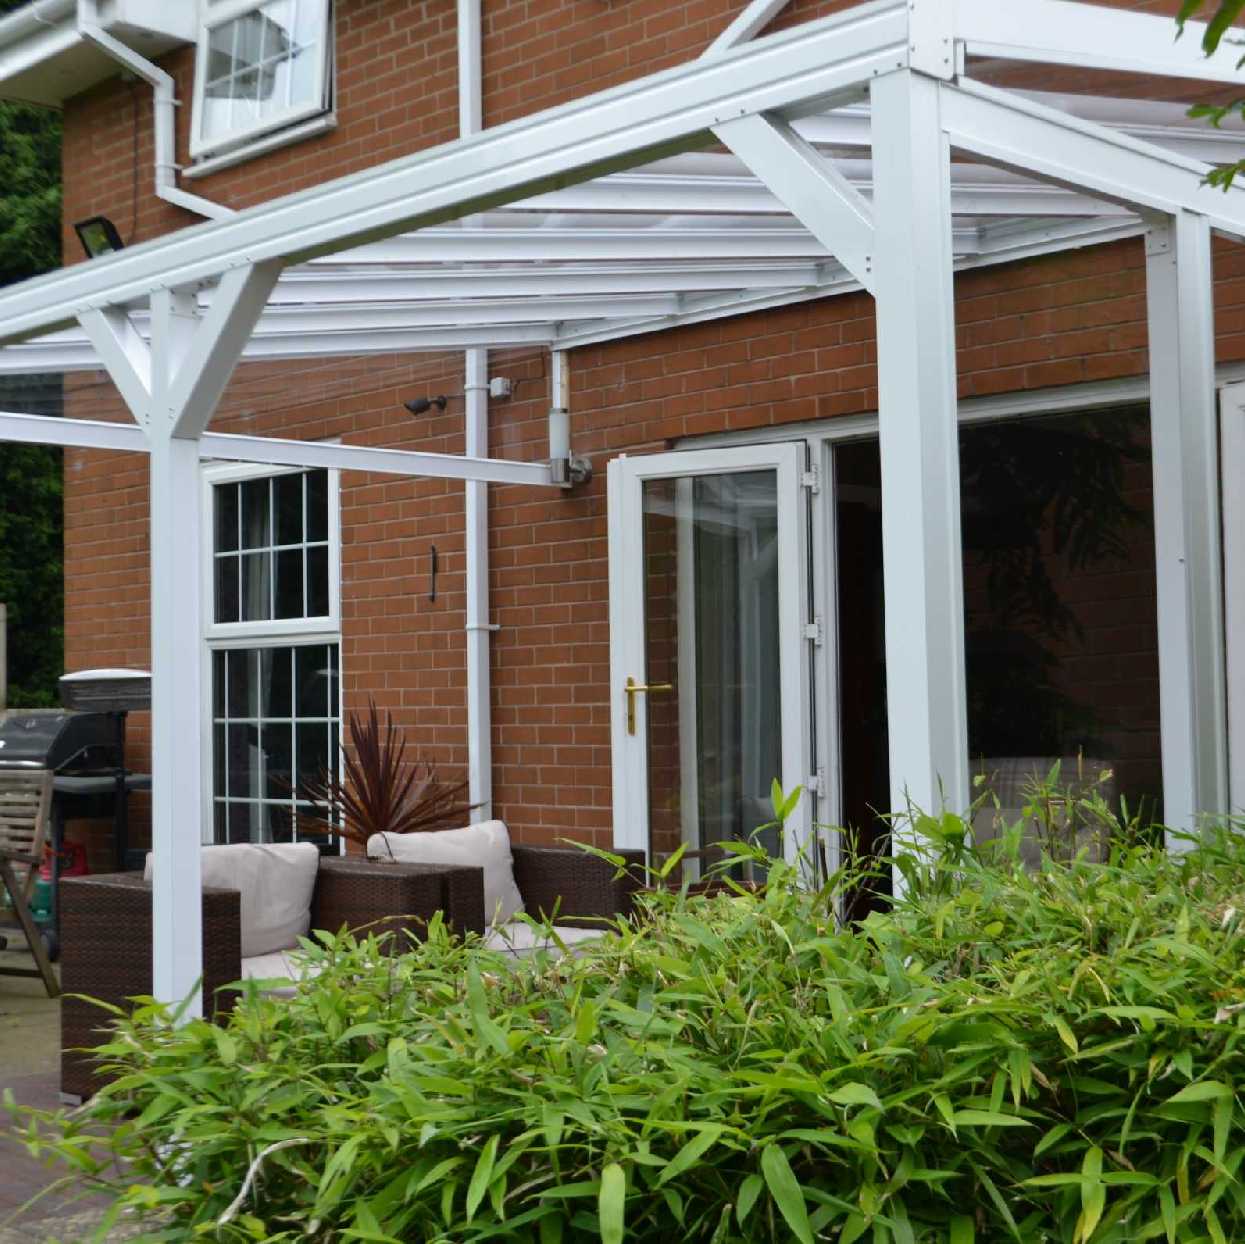 Omega Smart Lean-To Canopy, White with 6mm Glass Clear Plate Polycarbonate Glazing - 2.8m (W) x 1.5m (P), (2) Supporting Posts from Omega Build